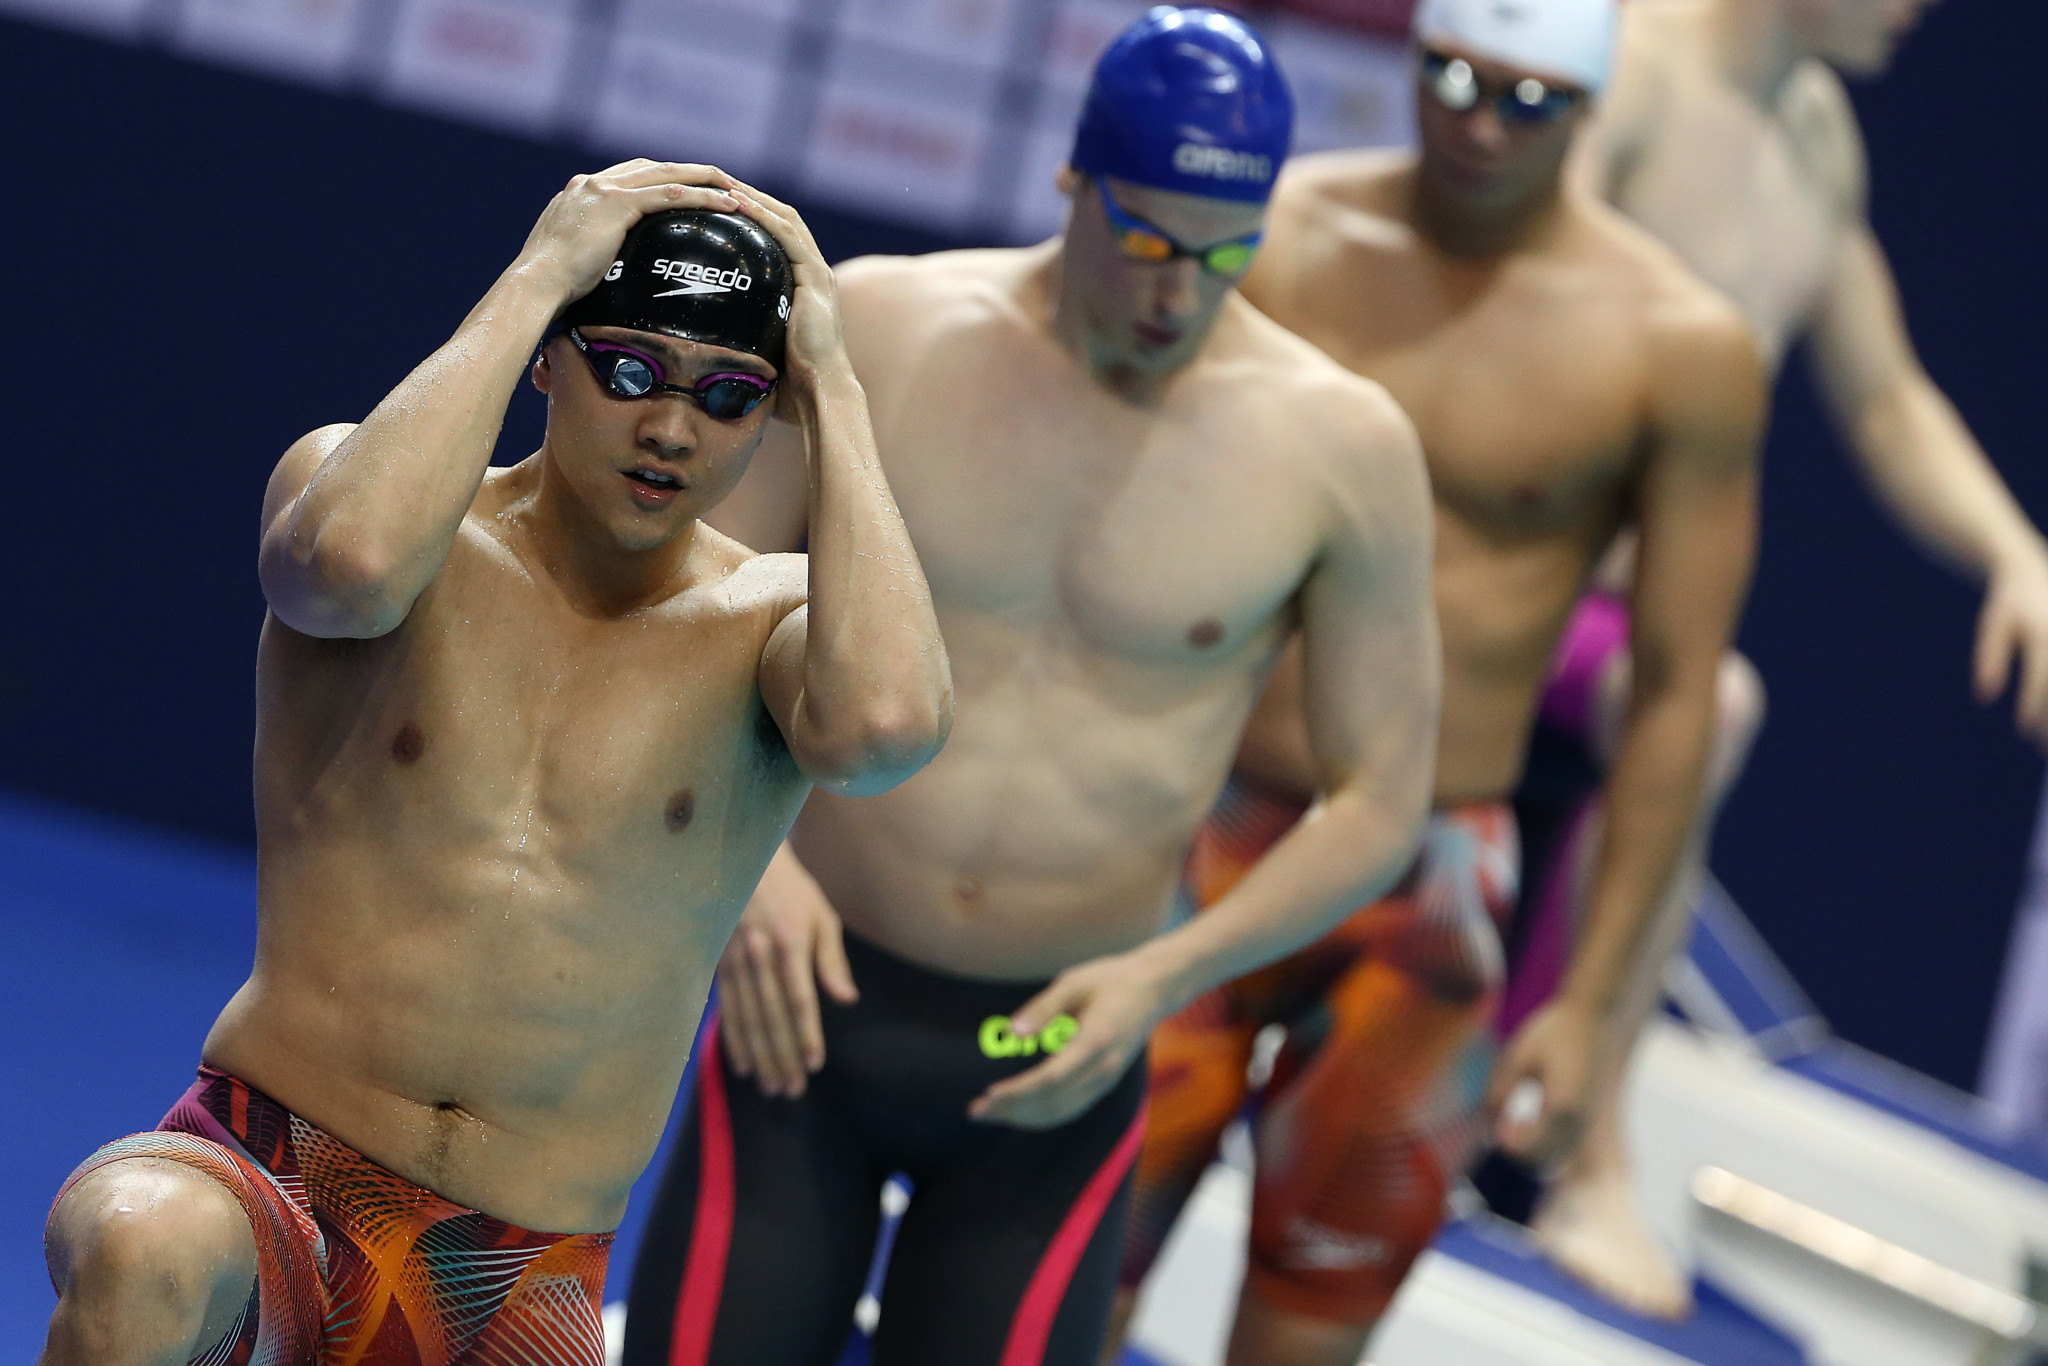 Singapore's Schooling has been training in the United States ahead of Tokyo 2020 ©Getty Images